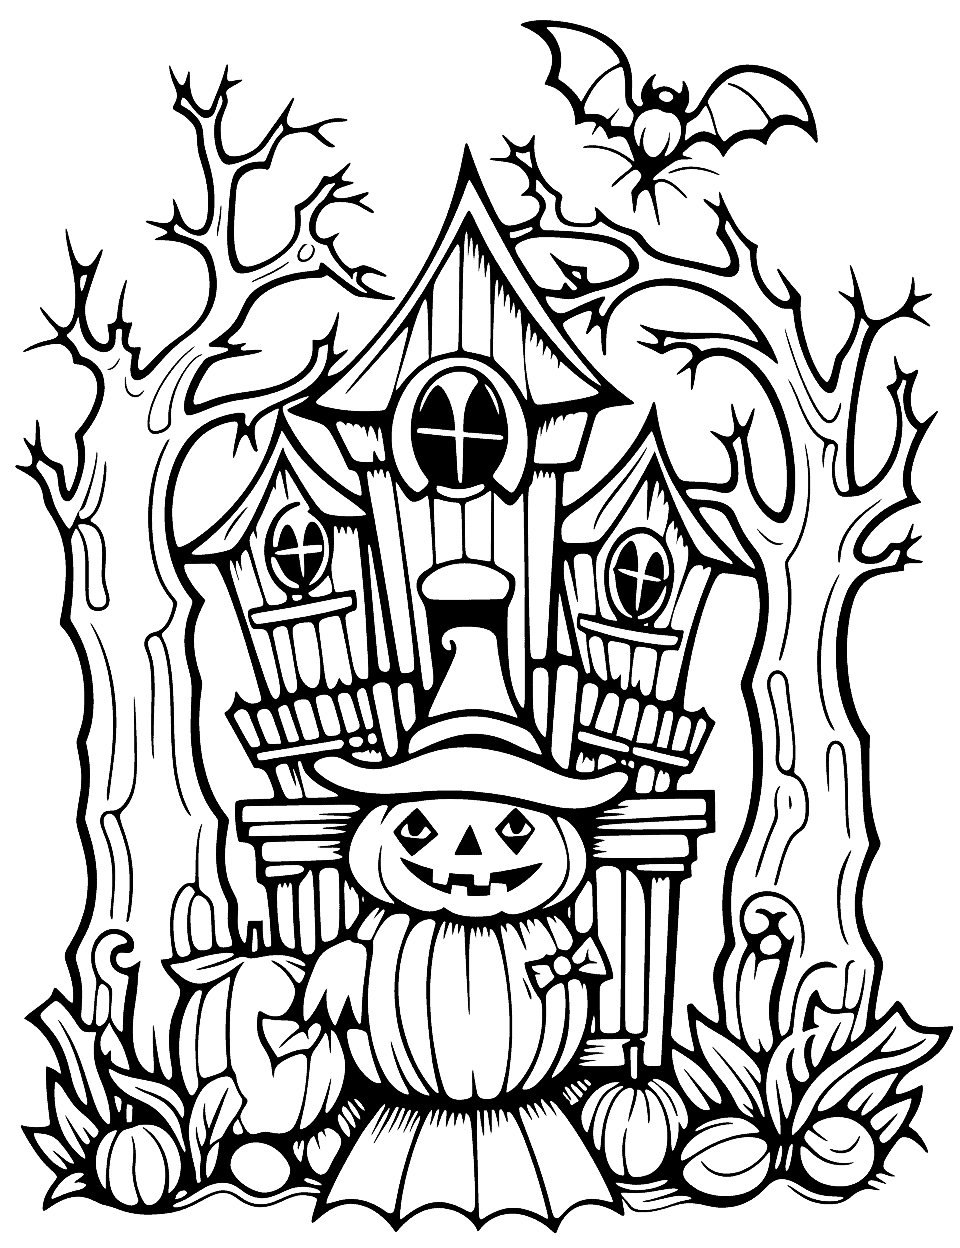 Spooky Haunted House Halloween Coloring Page - A scary yet fun haunted house scene. Perfect for older kids who love a good scare.